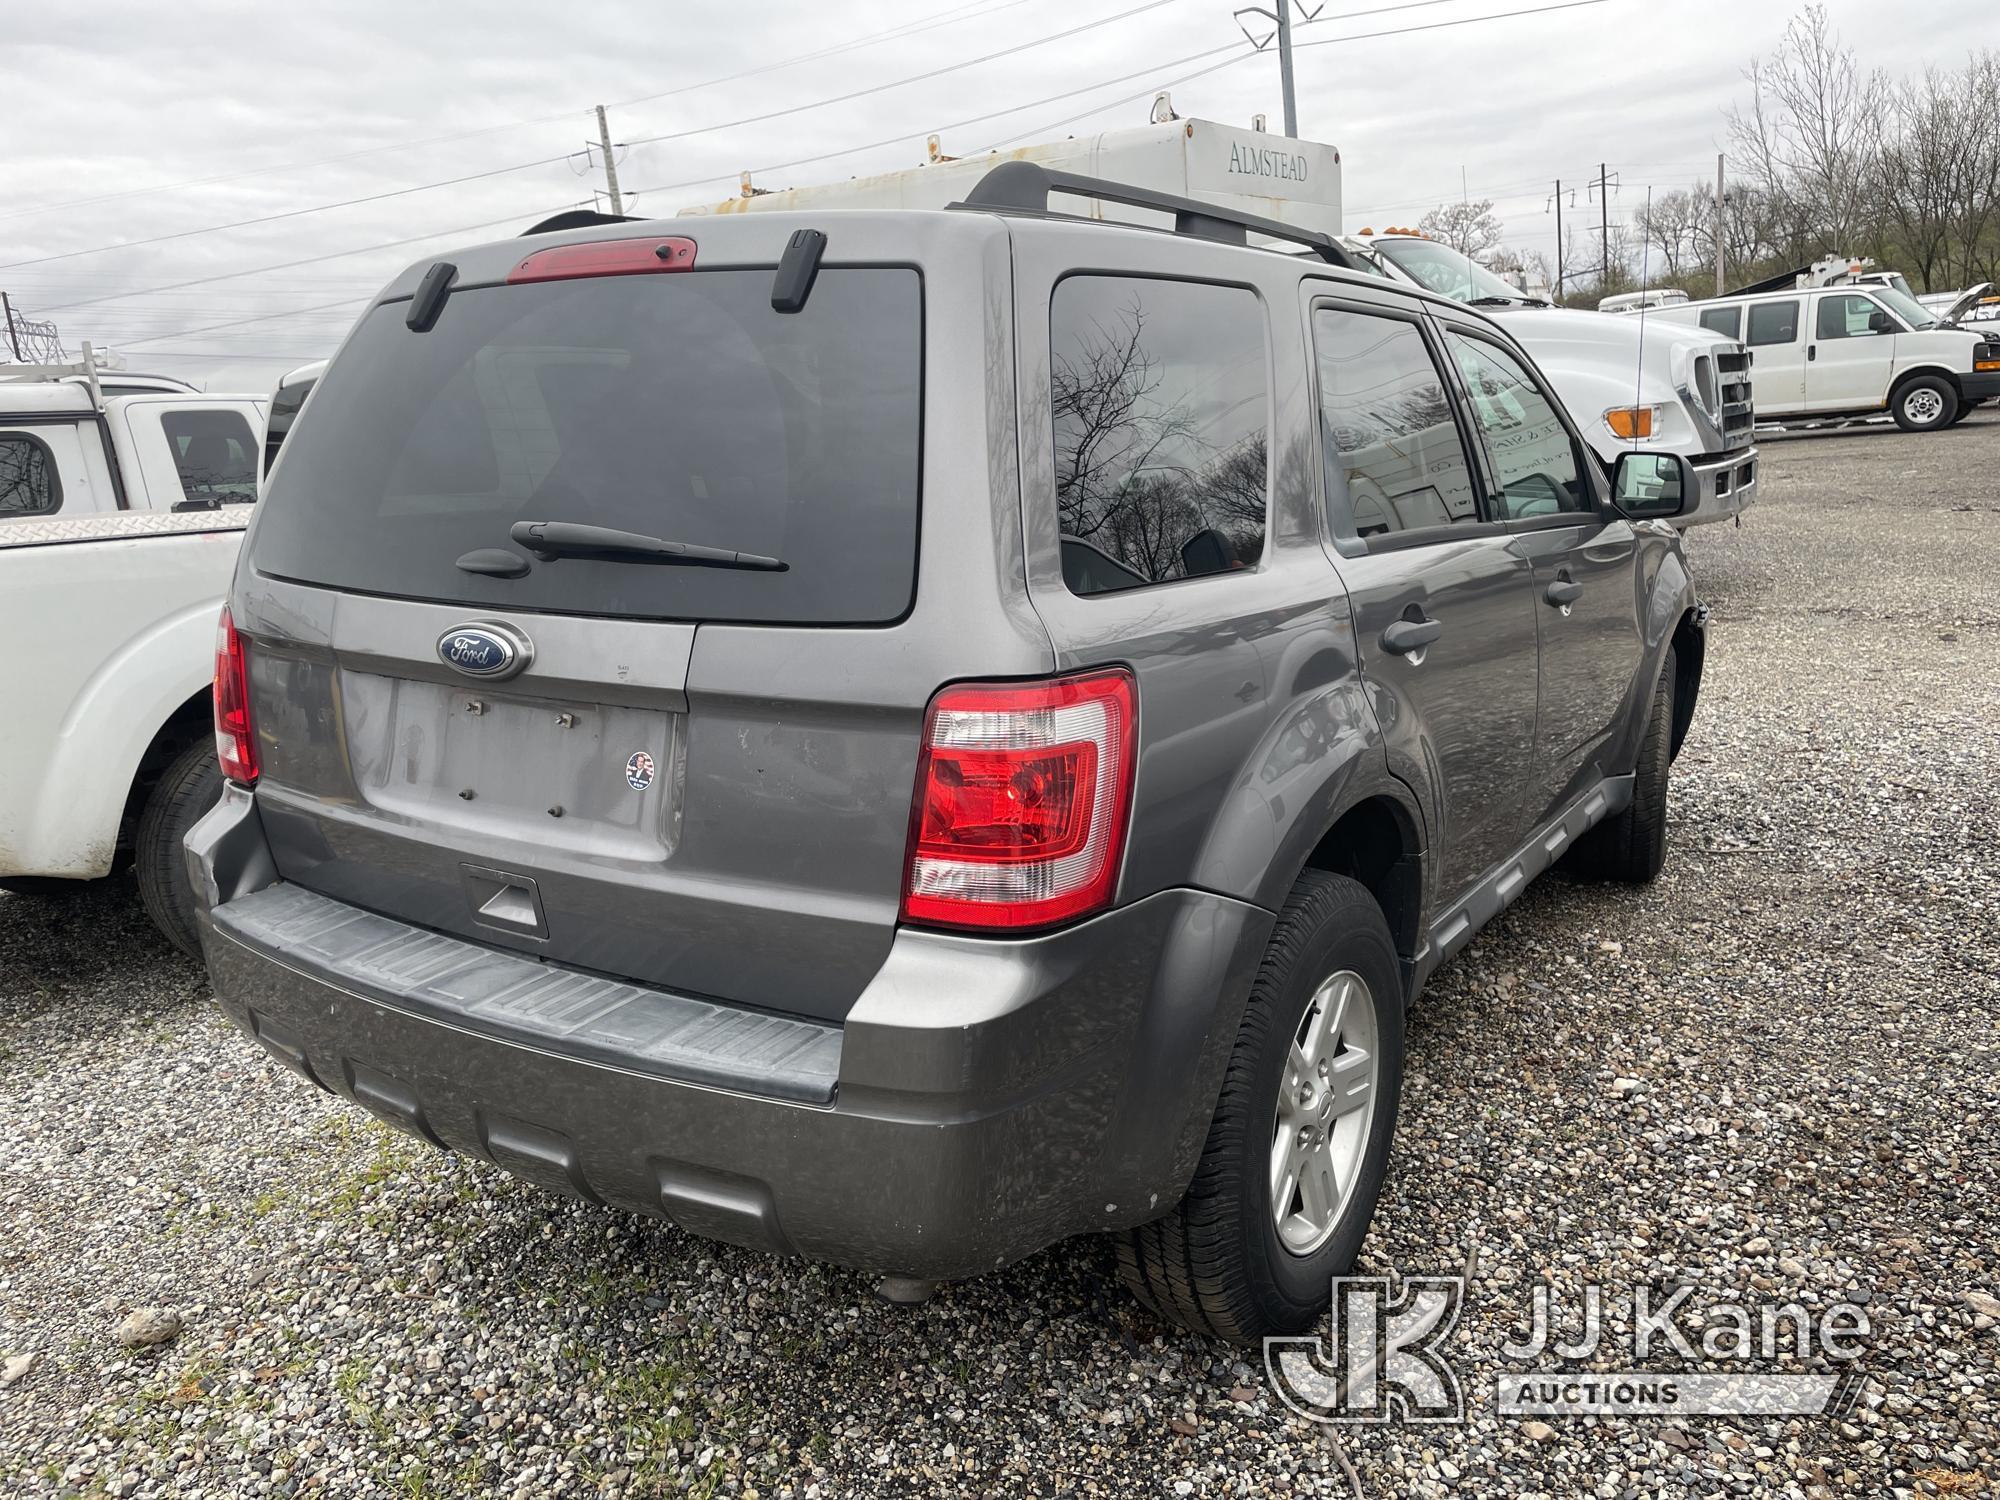 (Plymouth Meeting, PA) 2012 Ford Escape 4x4 4-Door Sport Utility Vehicle Wrecked, Runs & Does Not Mo